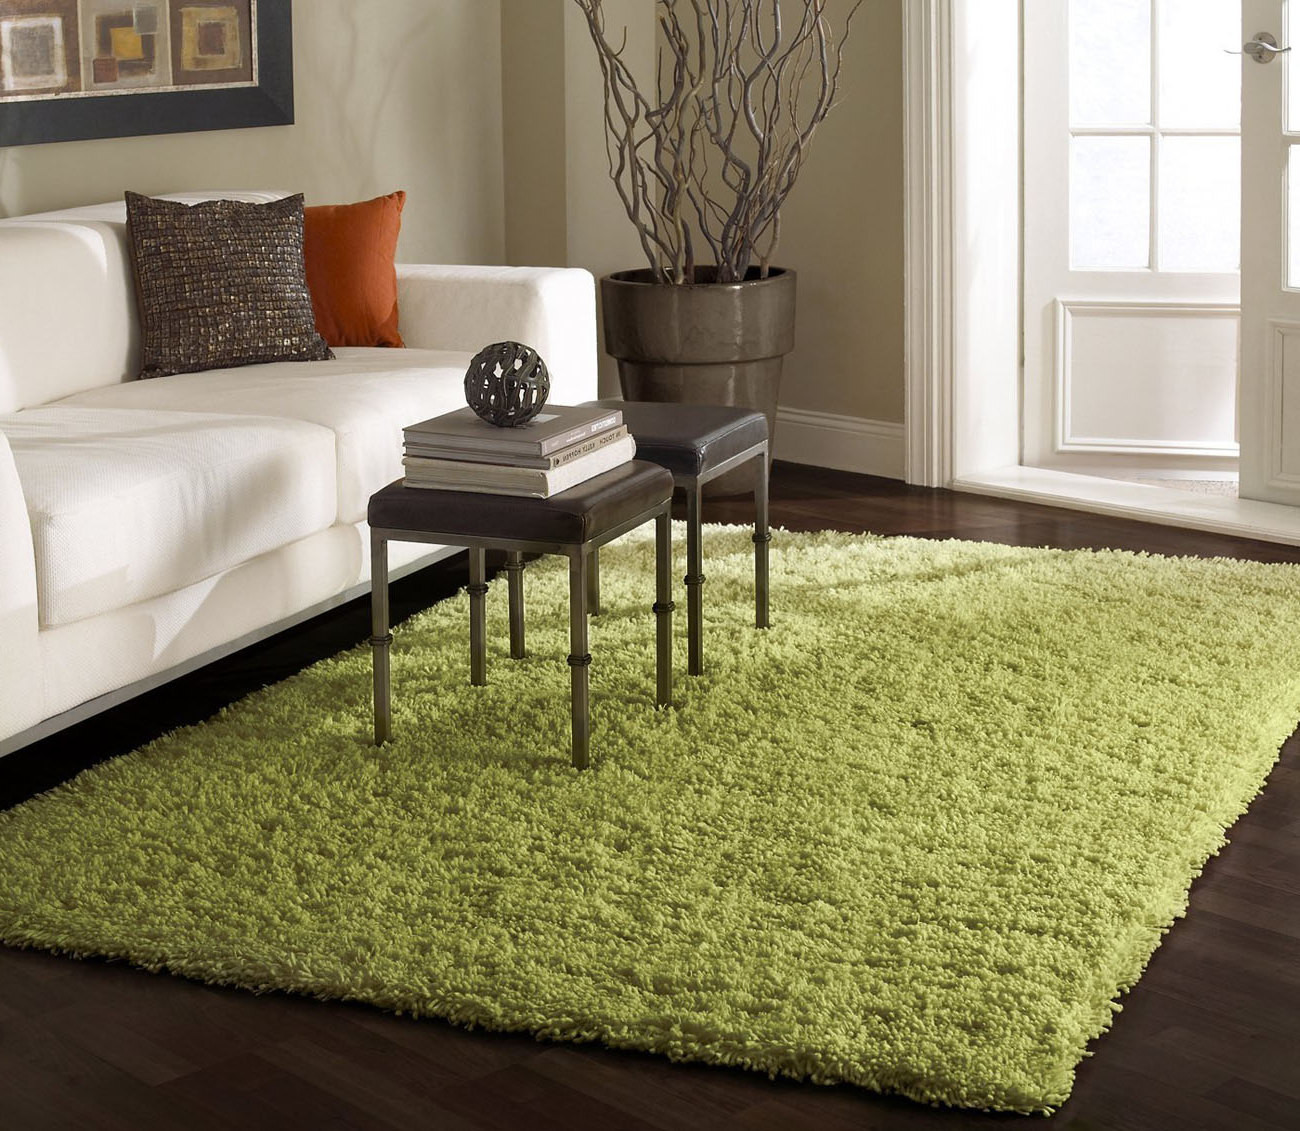 Green Rugs For Living Room
 Rugs for Cozy Living Room Area Rugs Ideas